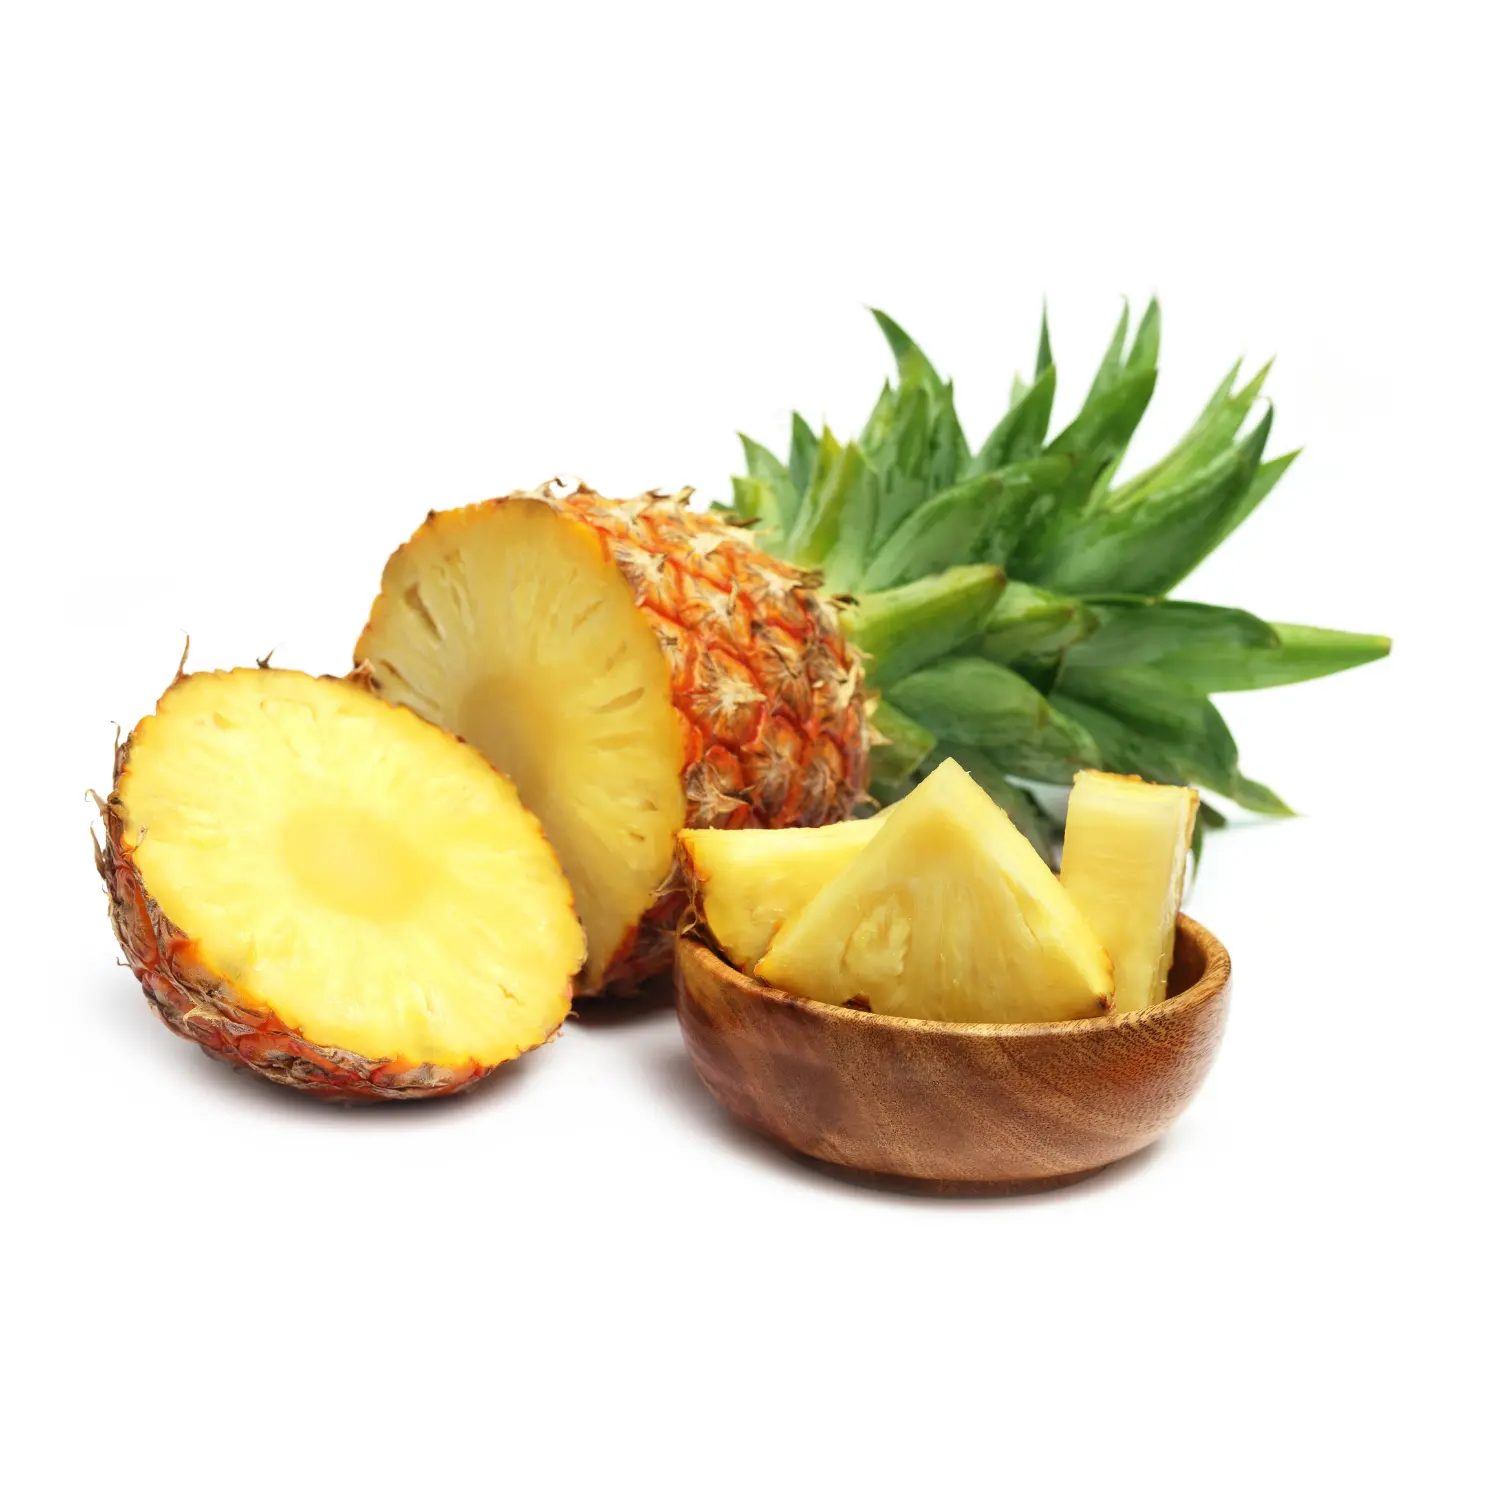 BEST FROZEN PINEAPPLE WITH HIGH QUALITY AT THE COMPETITIVE PRICE - TASTE AND DELICIOUS FOR YOUR DAILY LIFE - BEST SERVICES